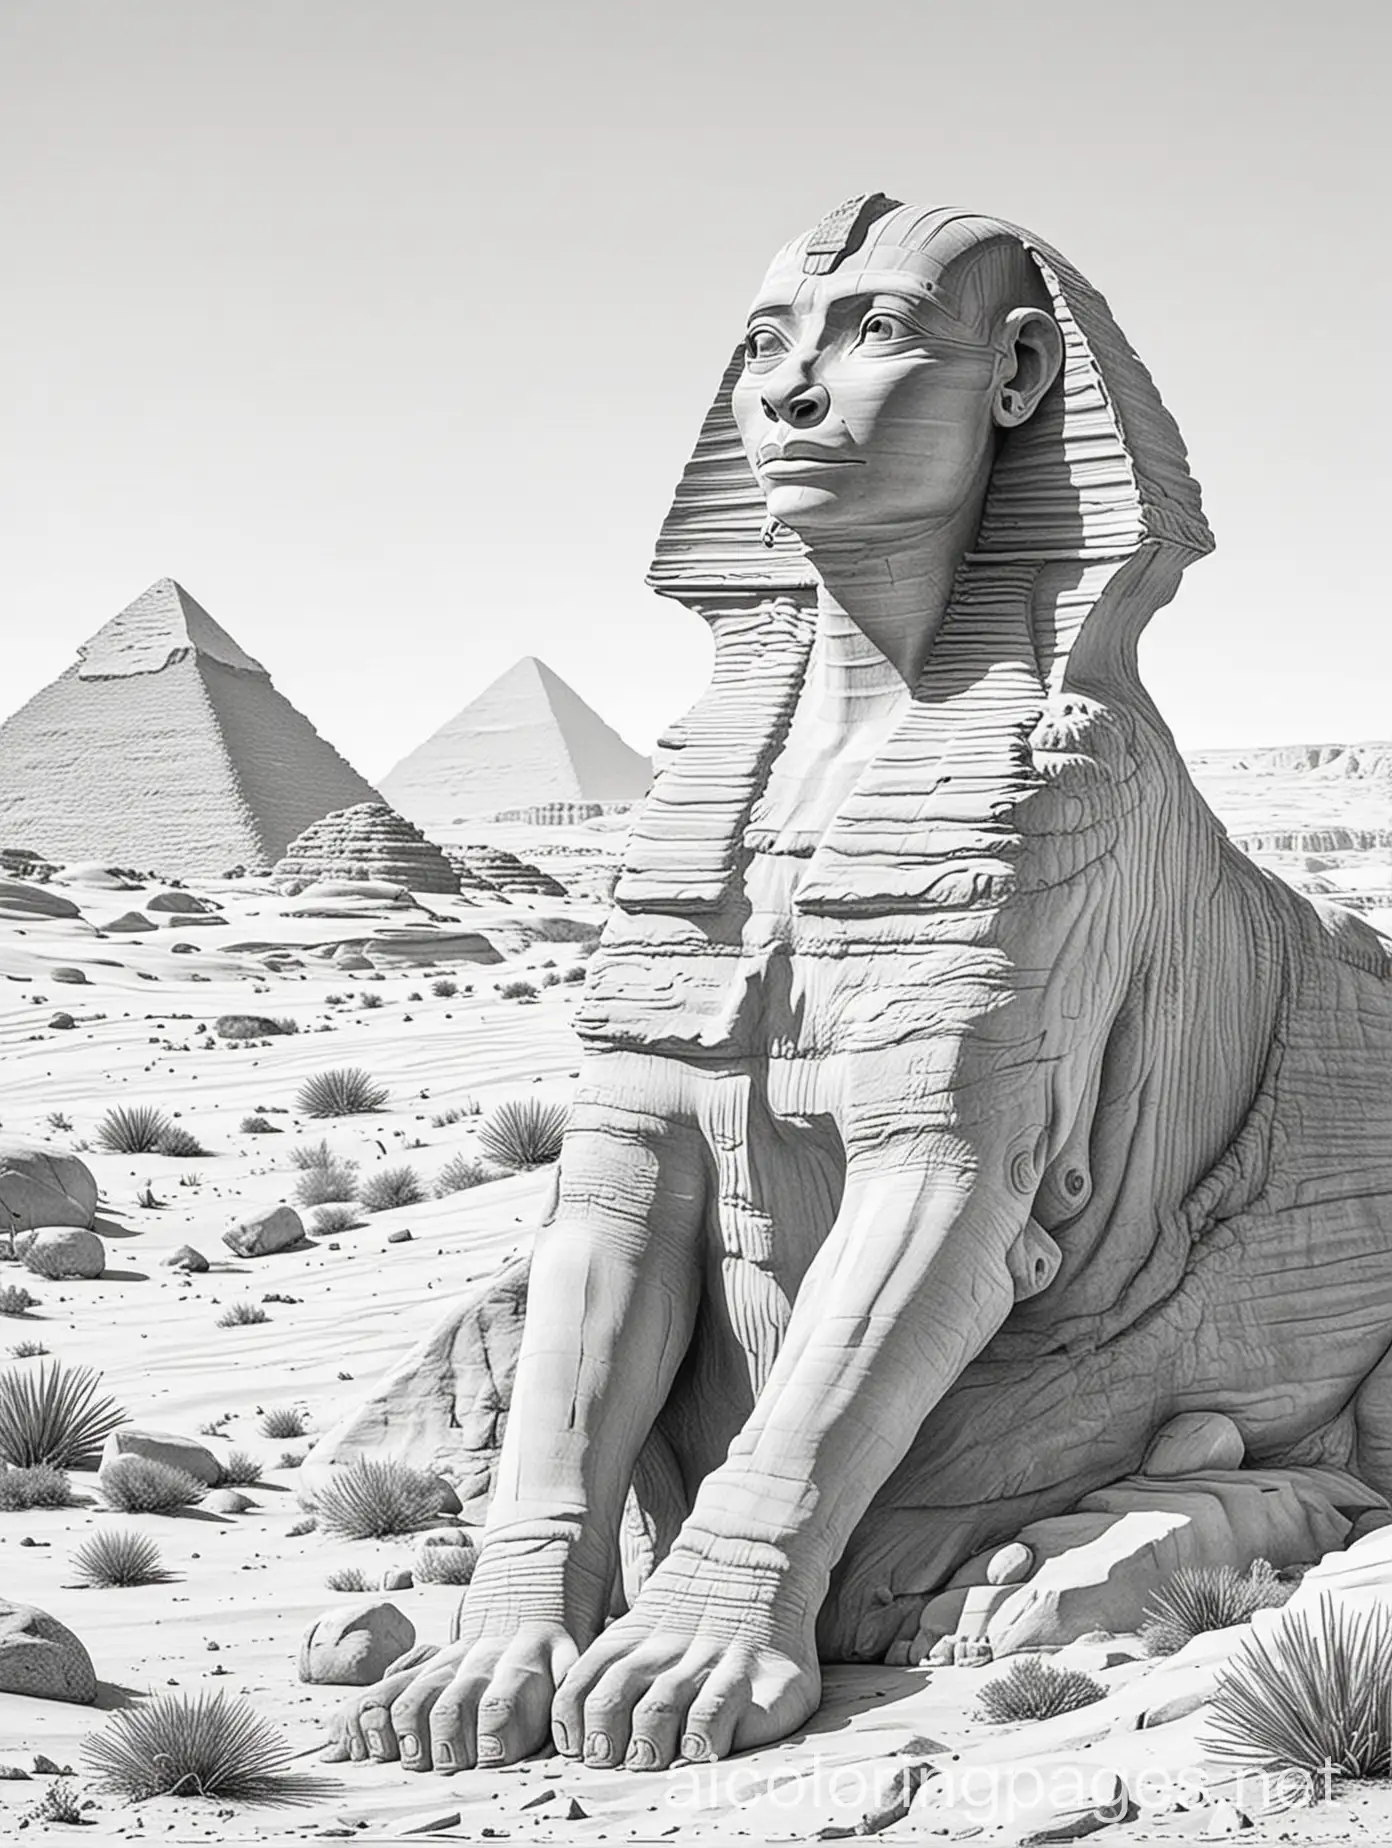 An oasis in the desert is guarded by a majestic sphinx, Colouring page, black and white, line drawing, white background, simplicity, lots of white space. The background of the colouring page is simply white to make it easy for children to colour within the lines., Coloring Page, black and white, line art, white background, Simplicity, Ample White Space. The background of the coloring page is plain white to make it easy for young children to color within the lines. The outlines of all the subjects are easy to distinguish, making it simple for kids to color without too much difficulty